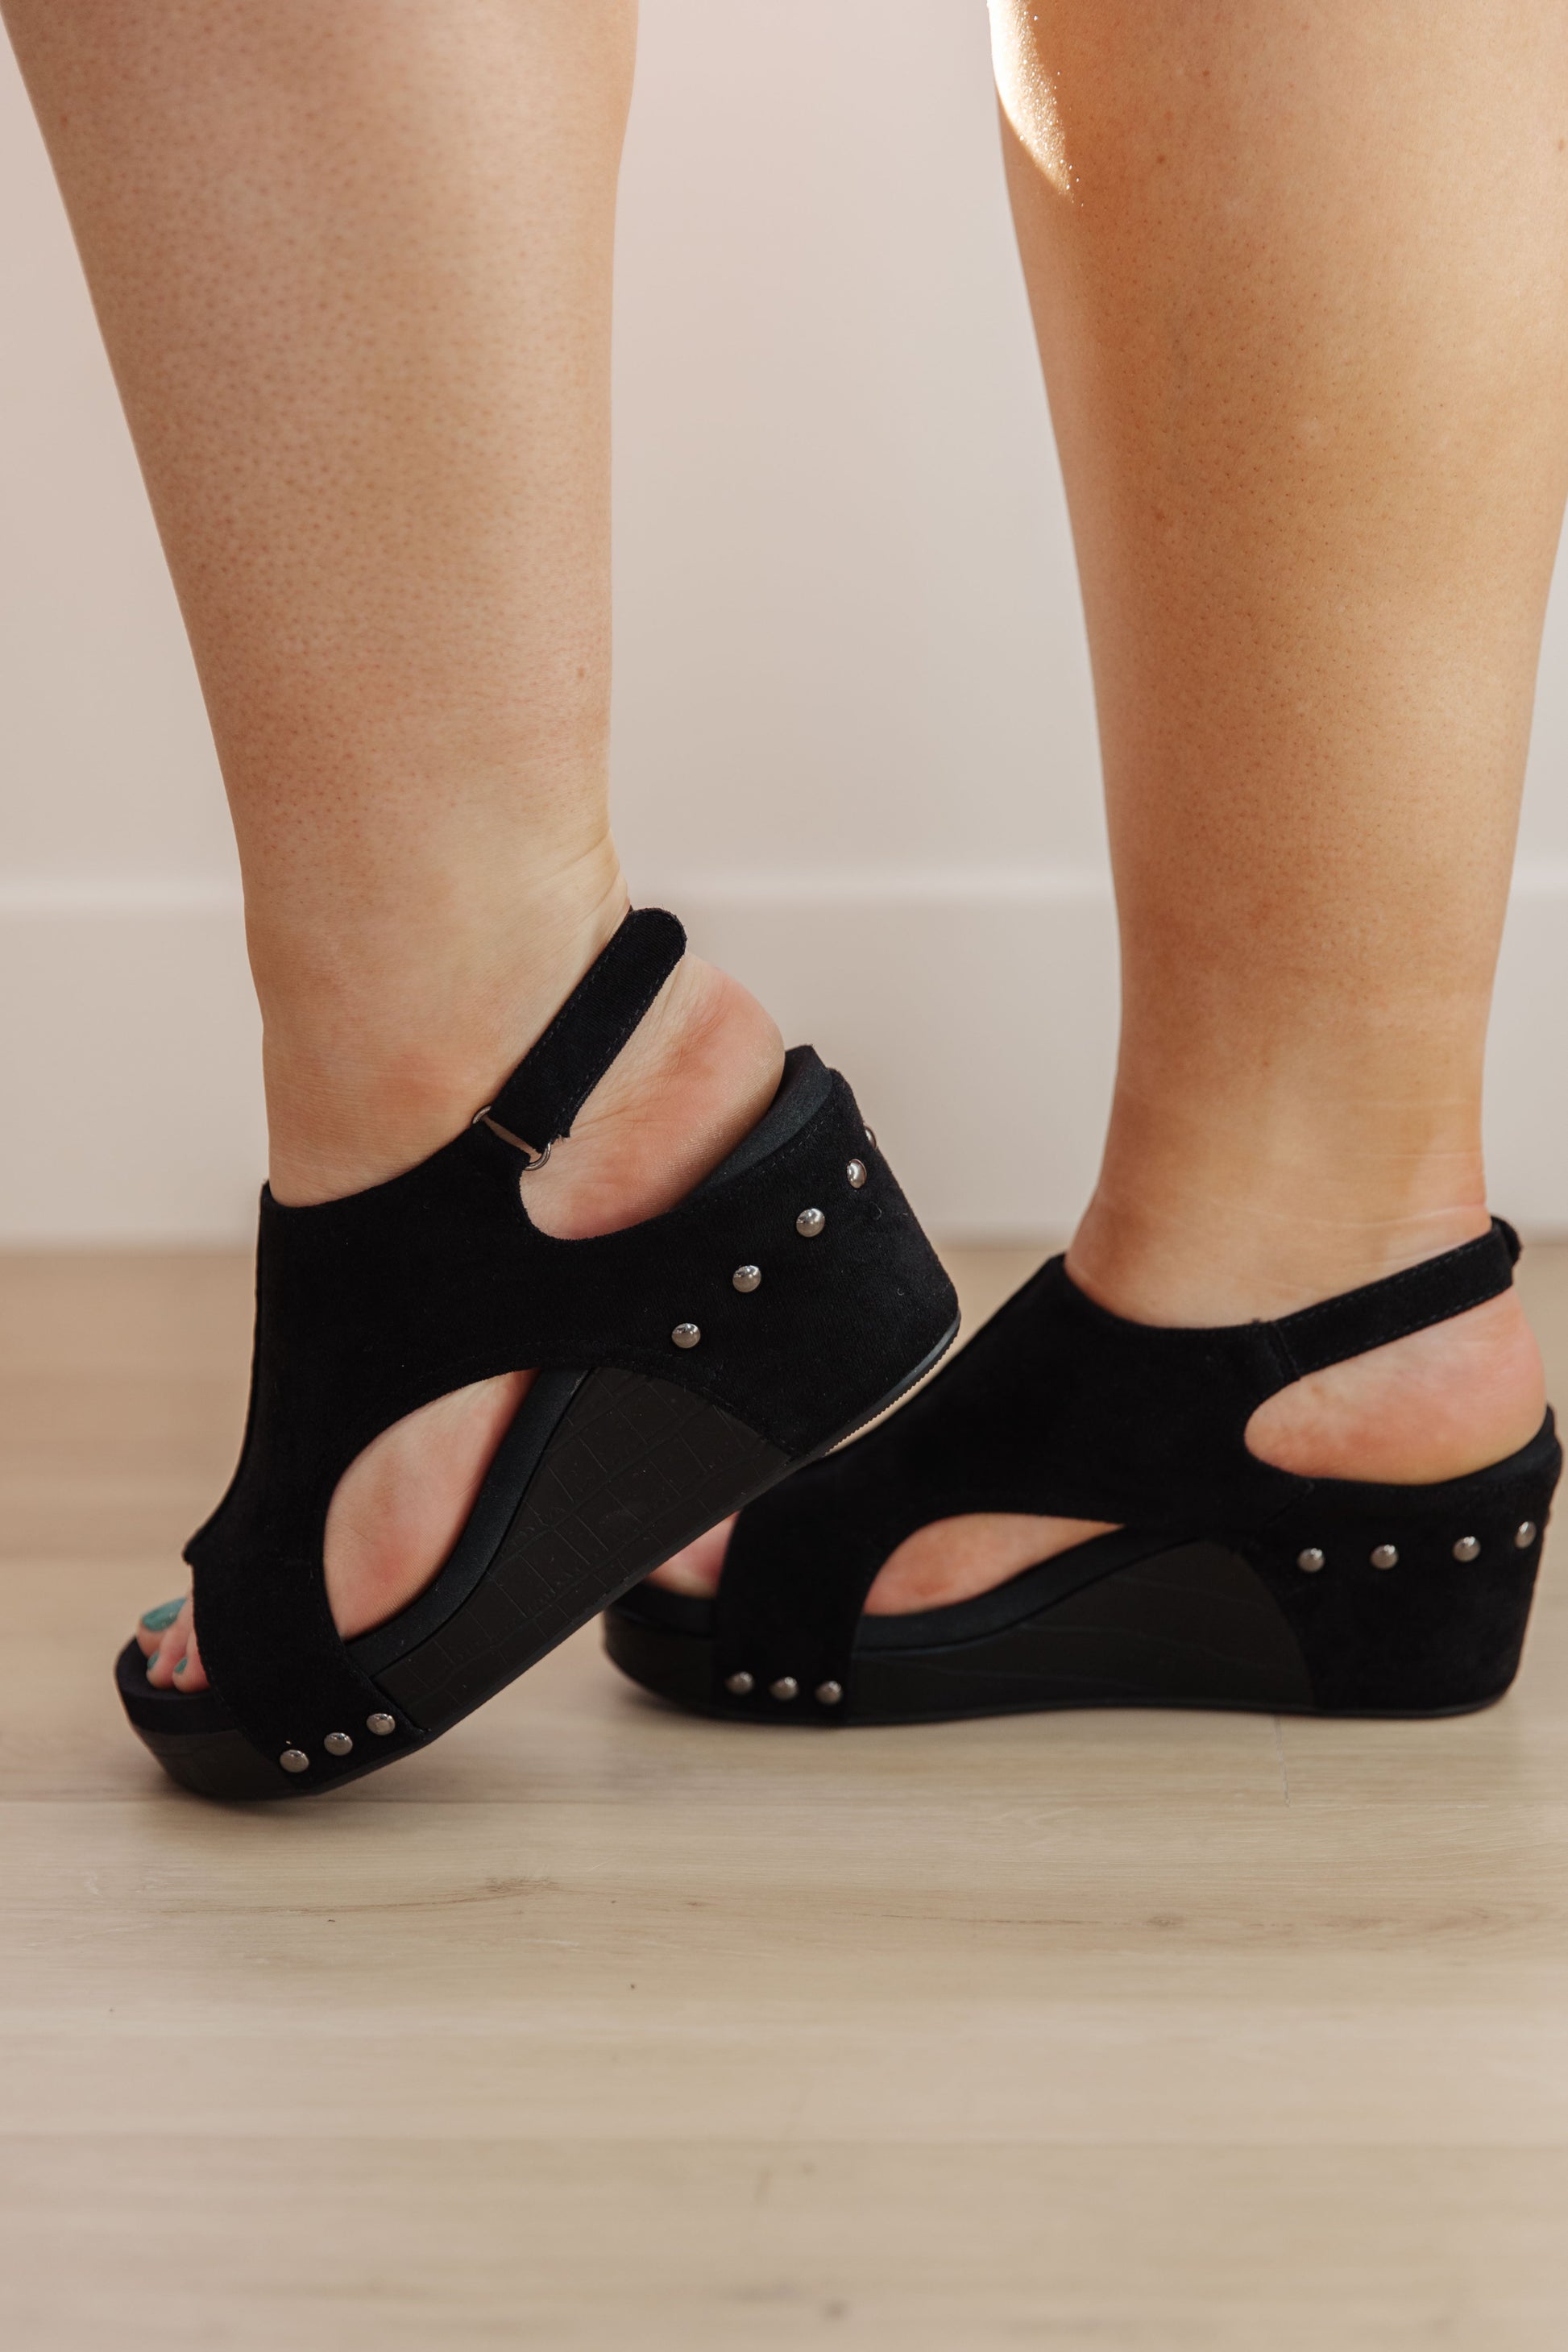 Walk This Way Wedge Sandals in Black Suede - Dixie Hike & Style